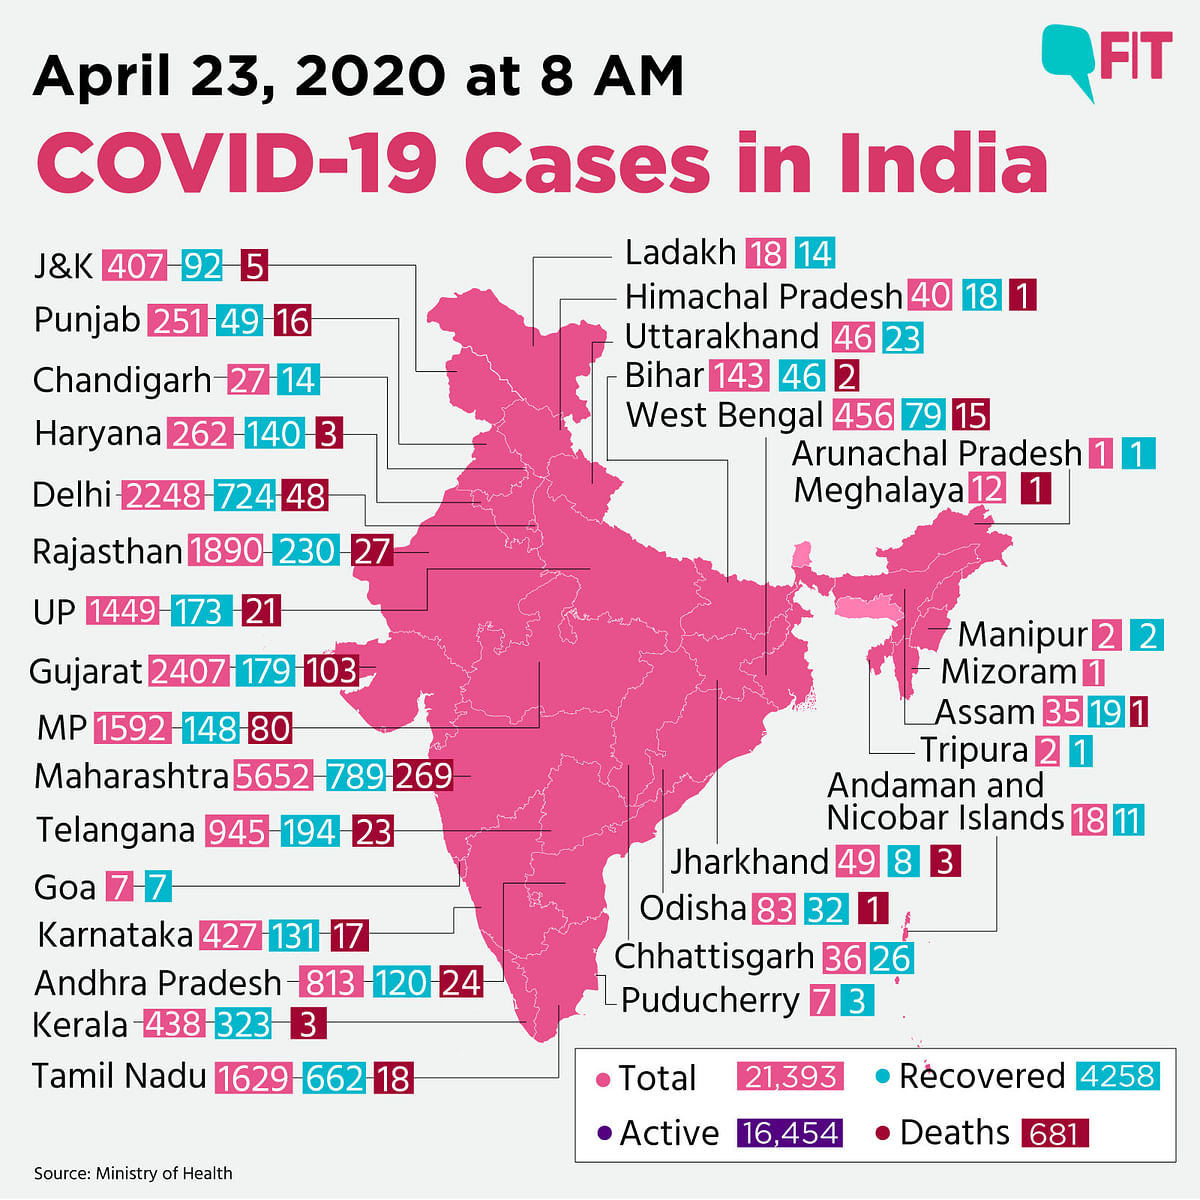 COVID-19 India: Death Toll Rises to 681; Cases Climb to 21,393 